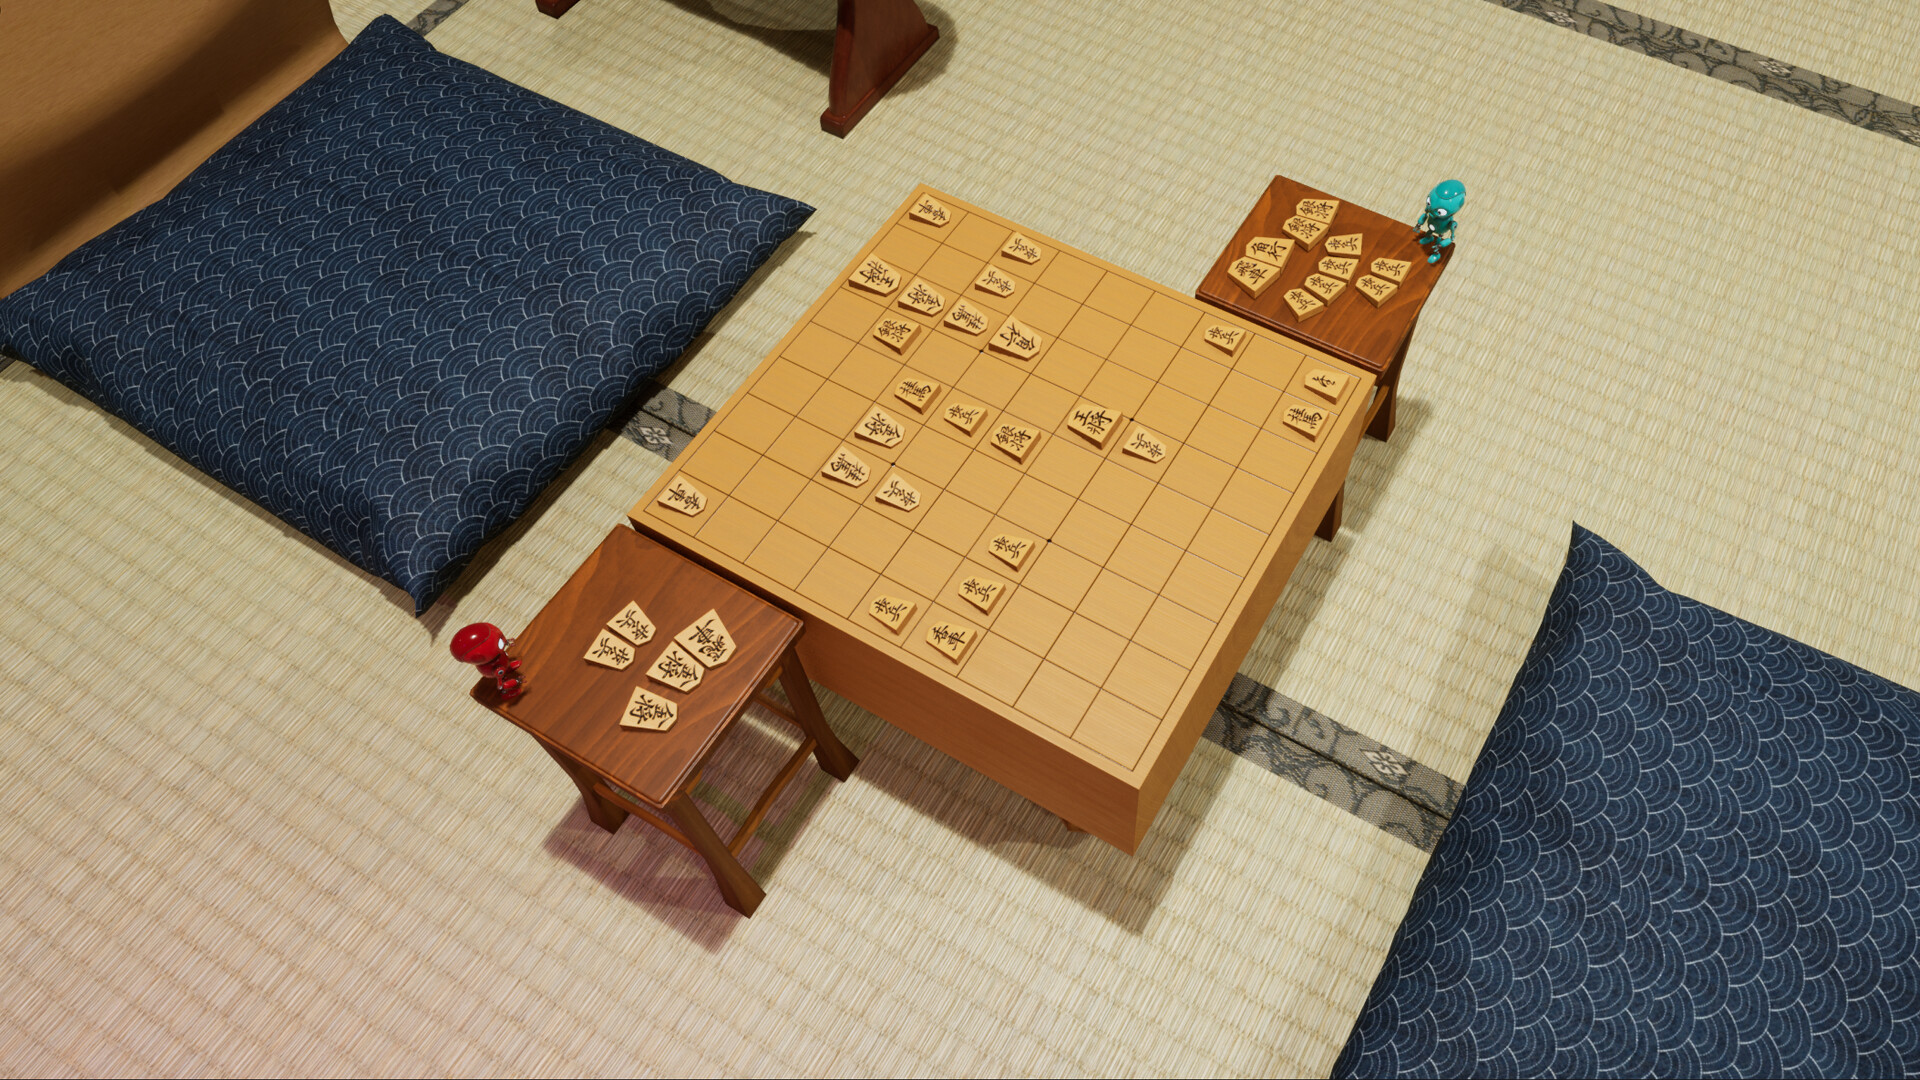 Classic Shogi Game on the App Store